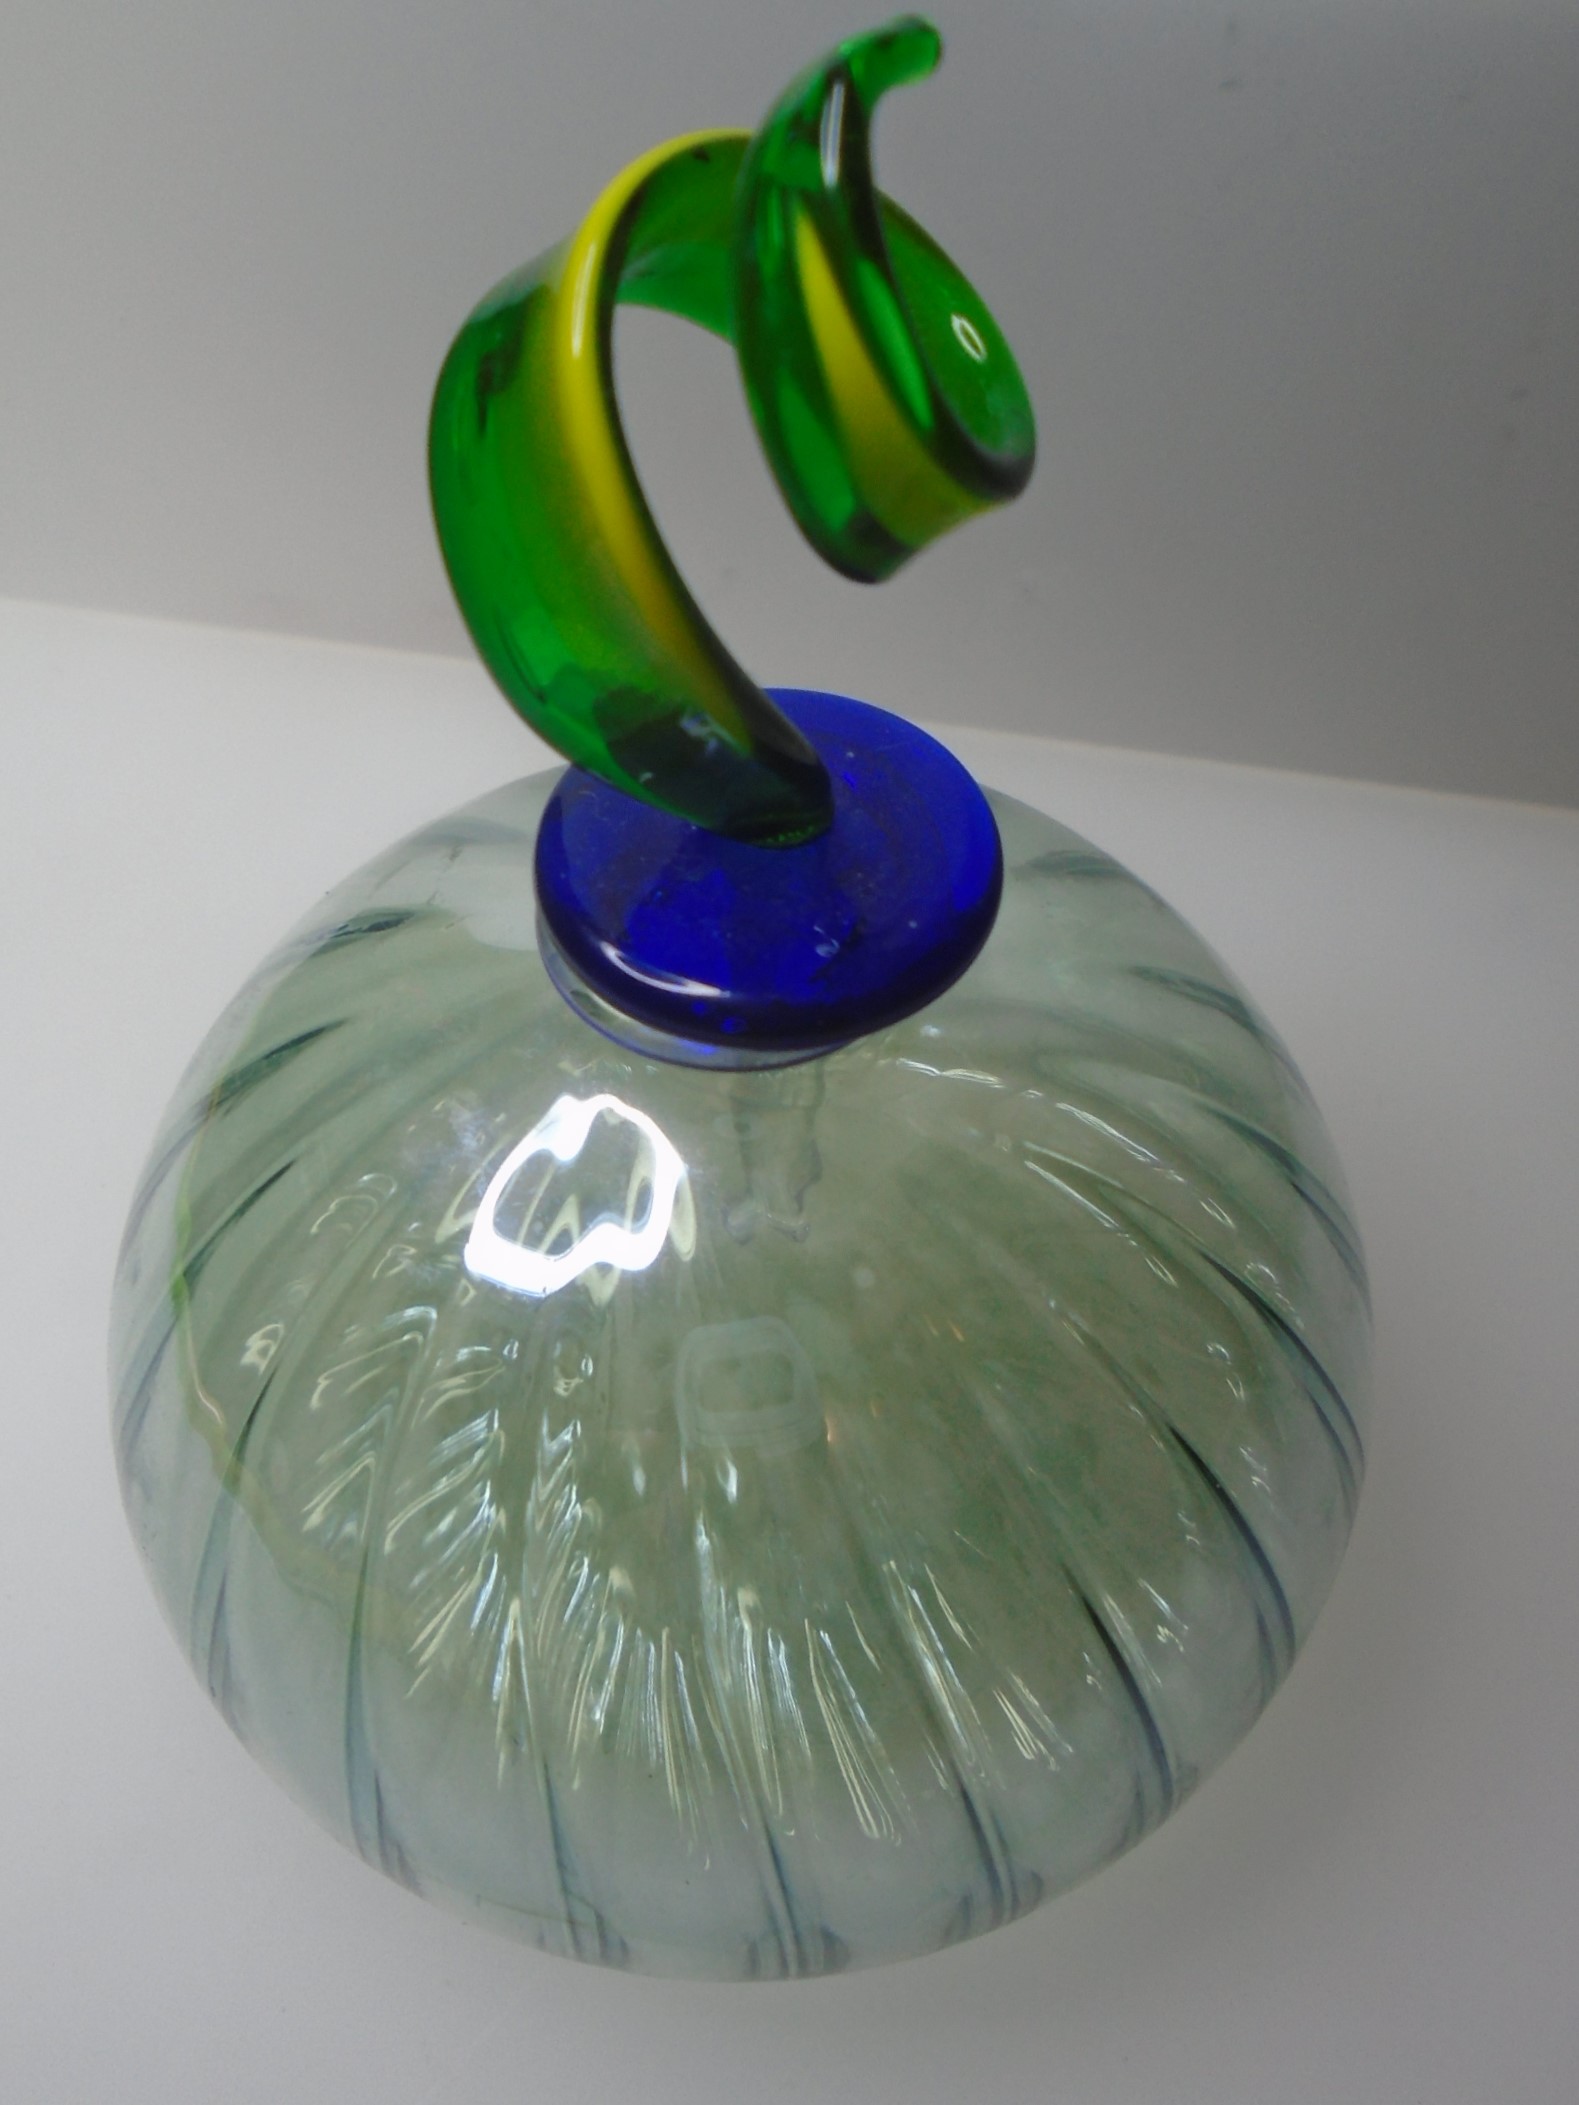 PRETTY GLASS PERFUME BOTTLE WITH SPIRAL SHAPED STOPPER.